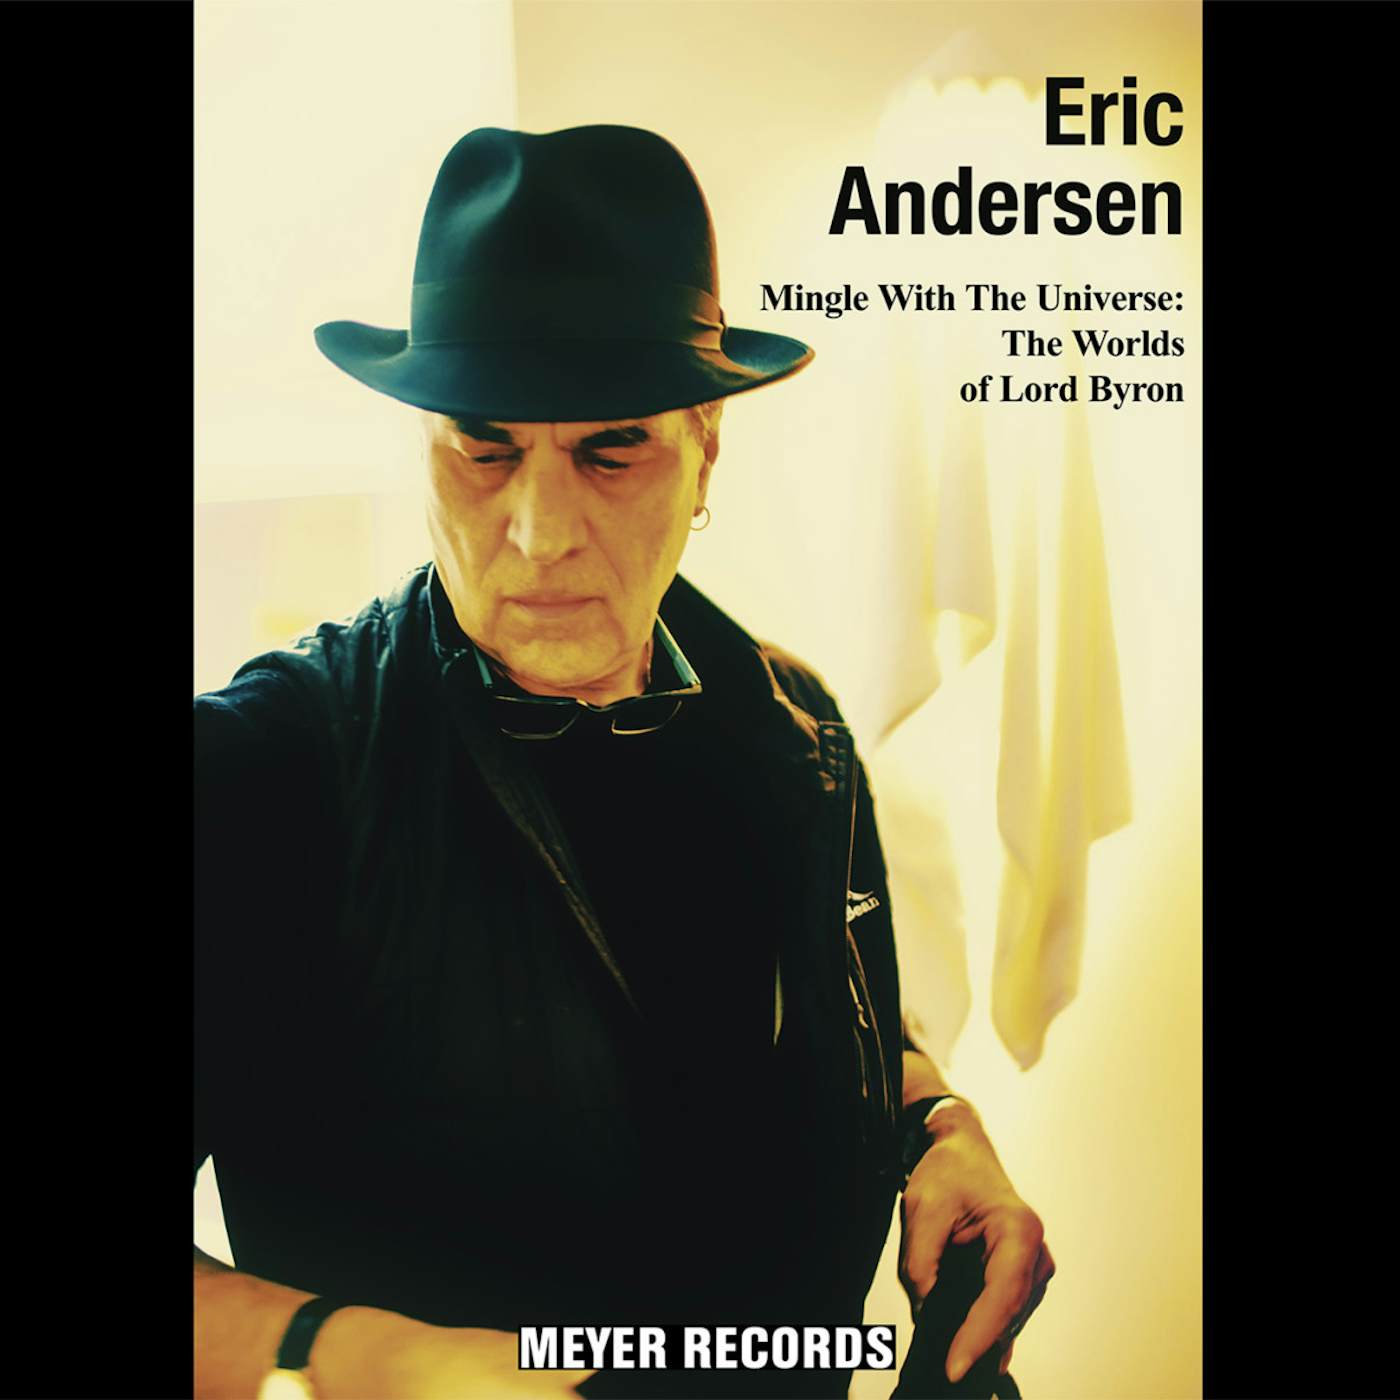 Eric Andersen MINGLE WITH THE UNIVERSE: WORLDS OF LORD BYRON Vinyl Record